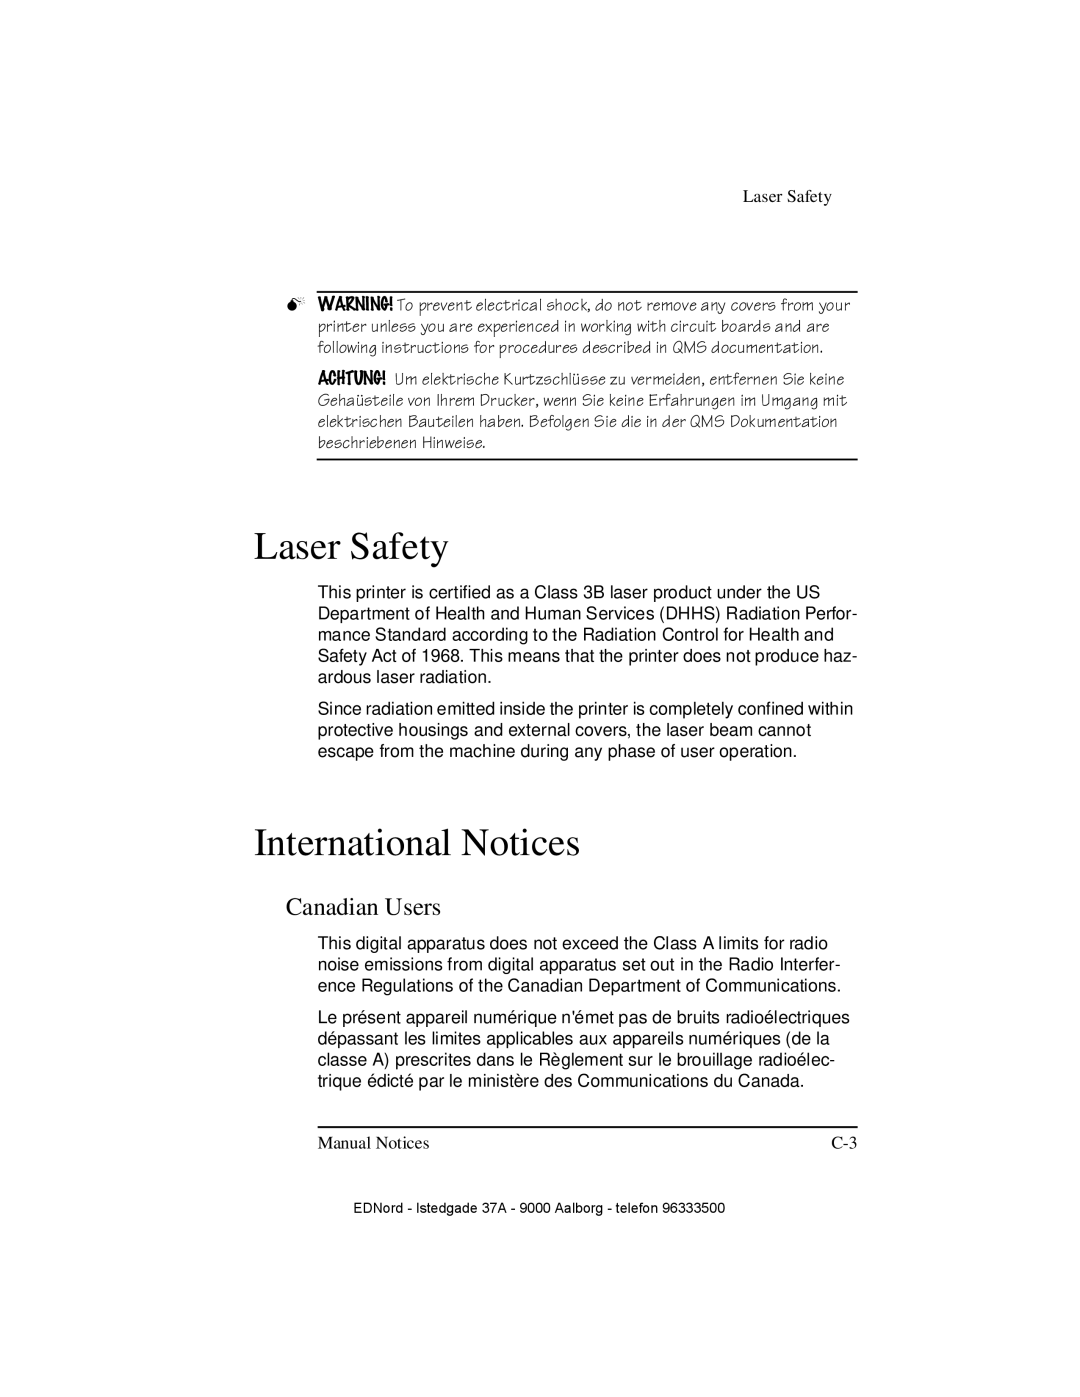 IBM QMS 4525 manual Laser Safety, International Notices, Canadian Users 